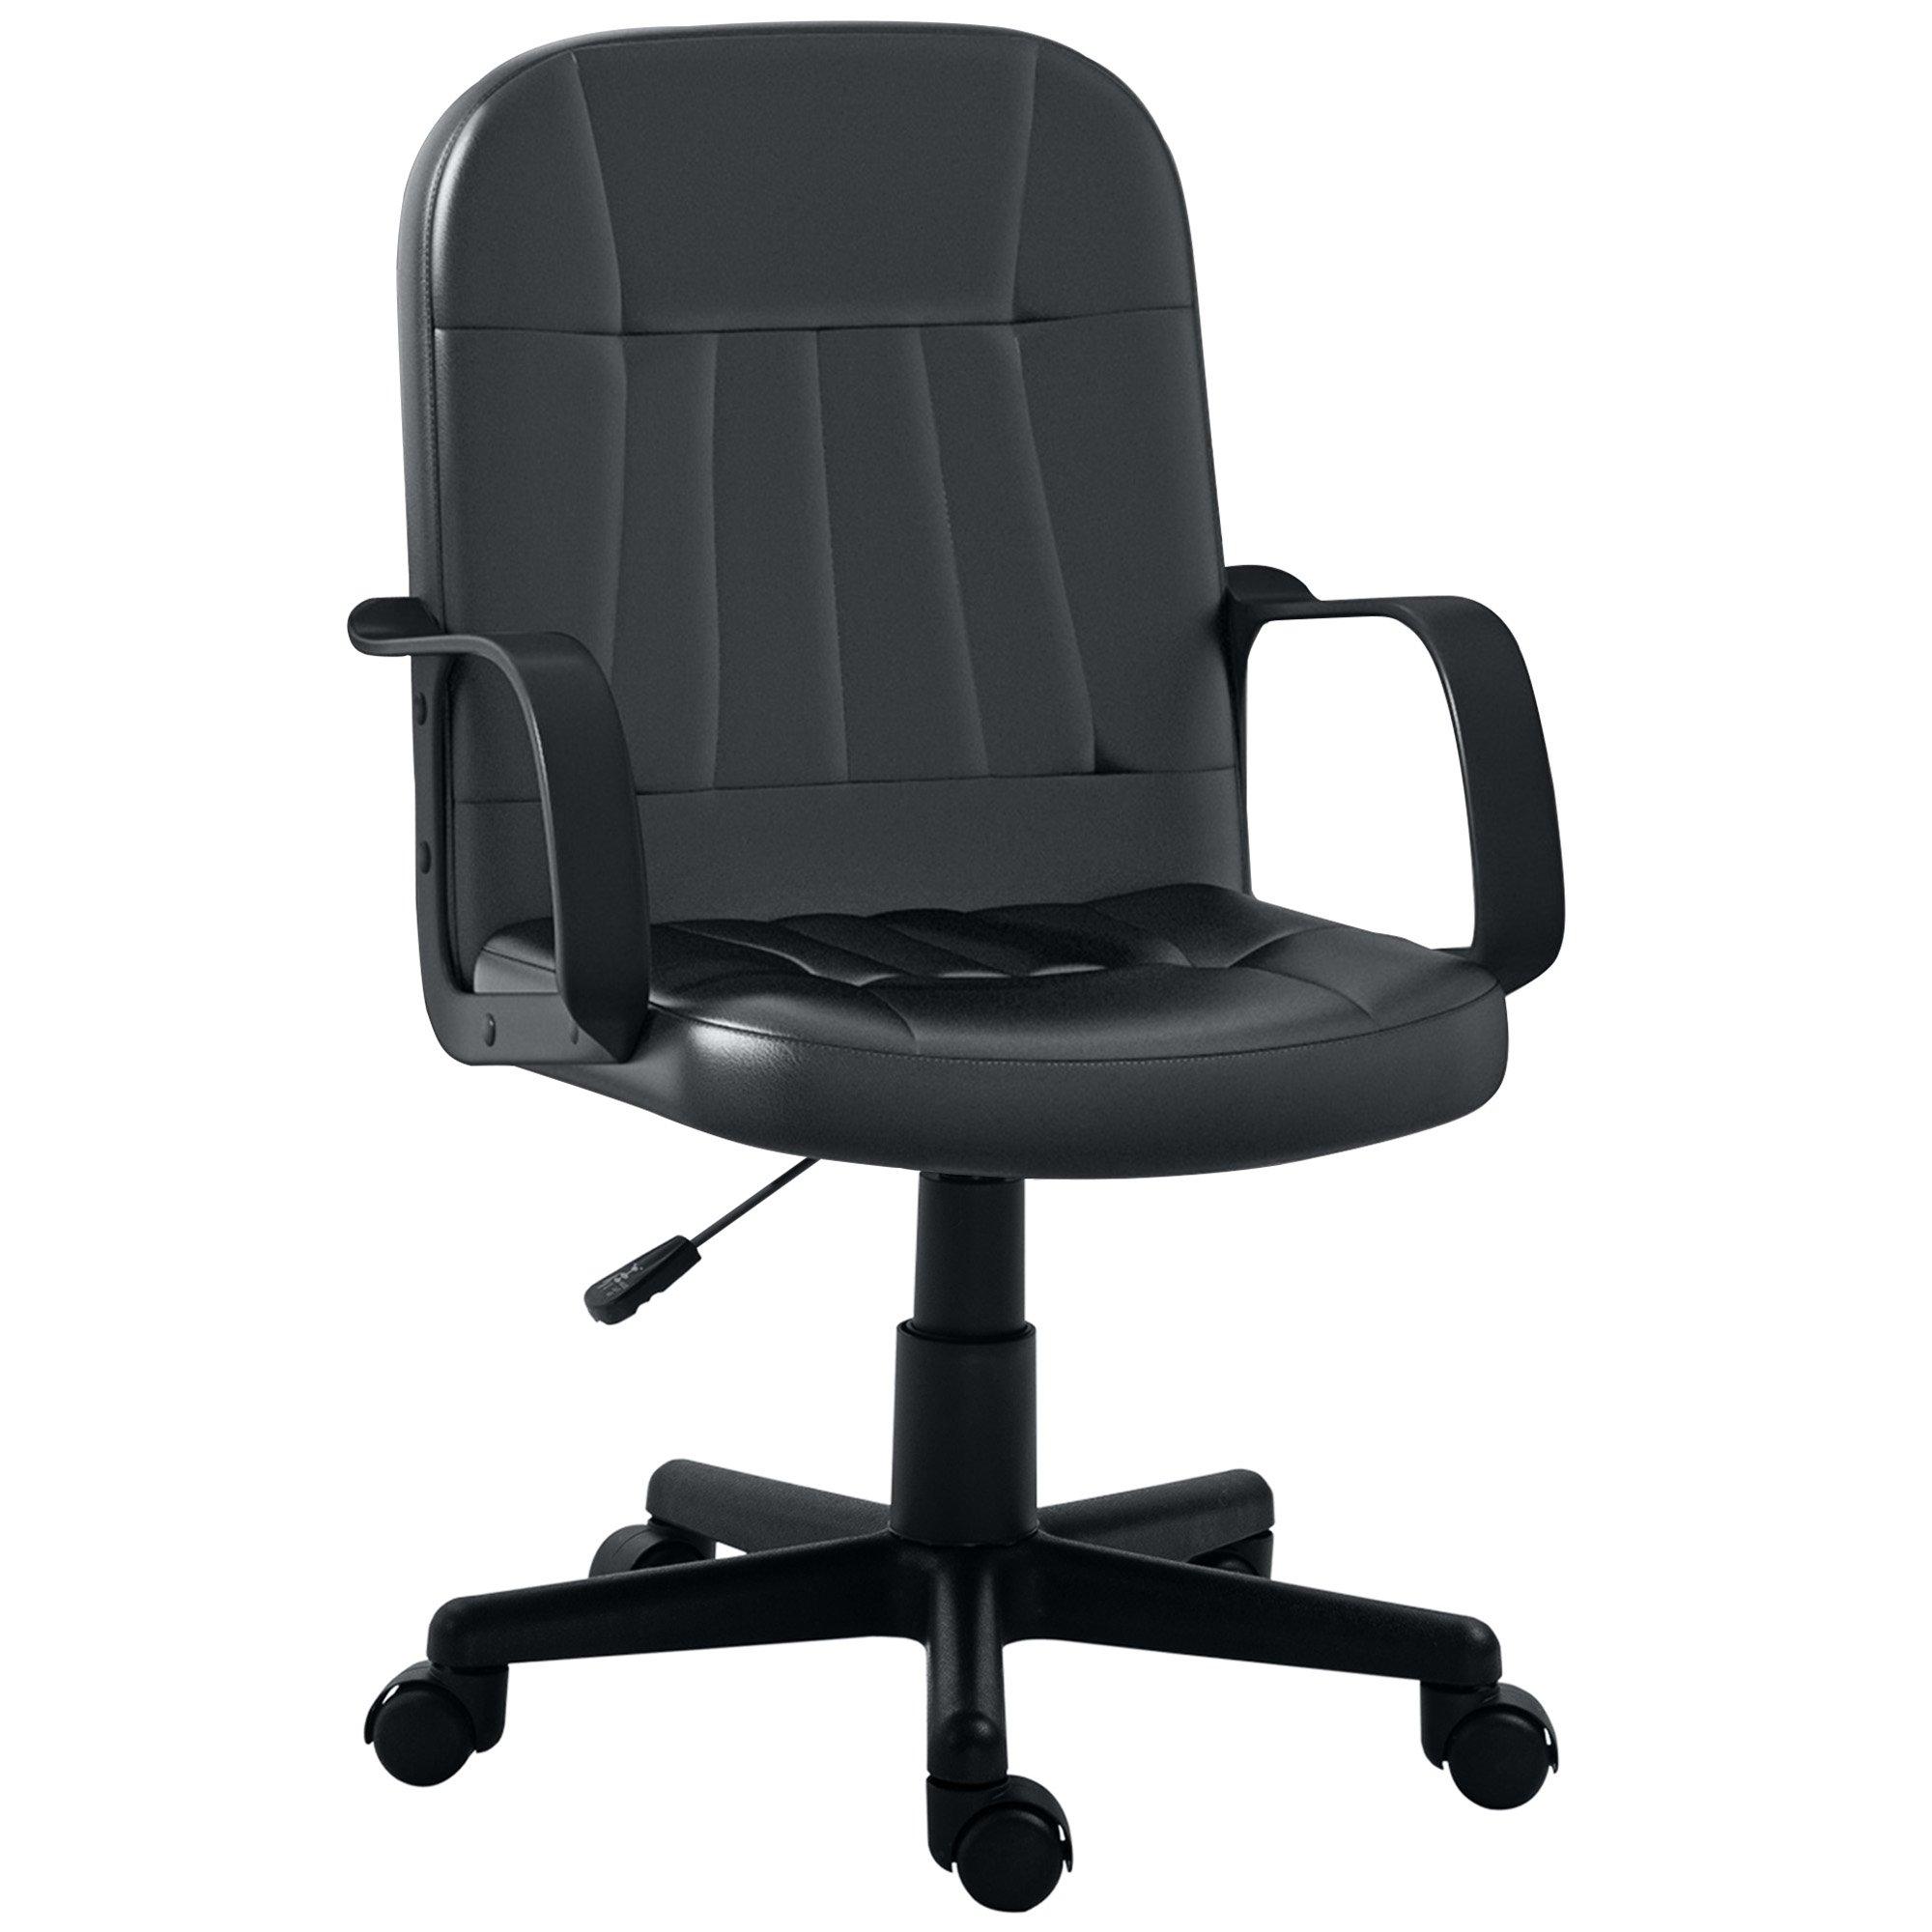 HOMCOM PU Leather Swivel Home Office Chair with Armrest